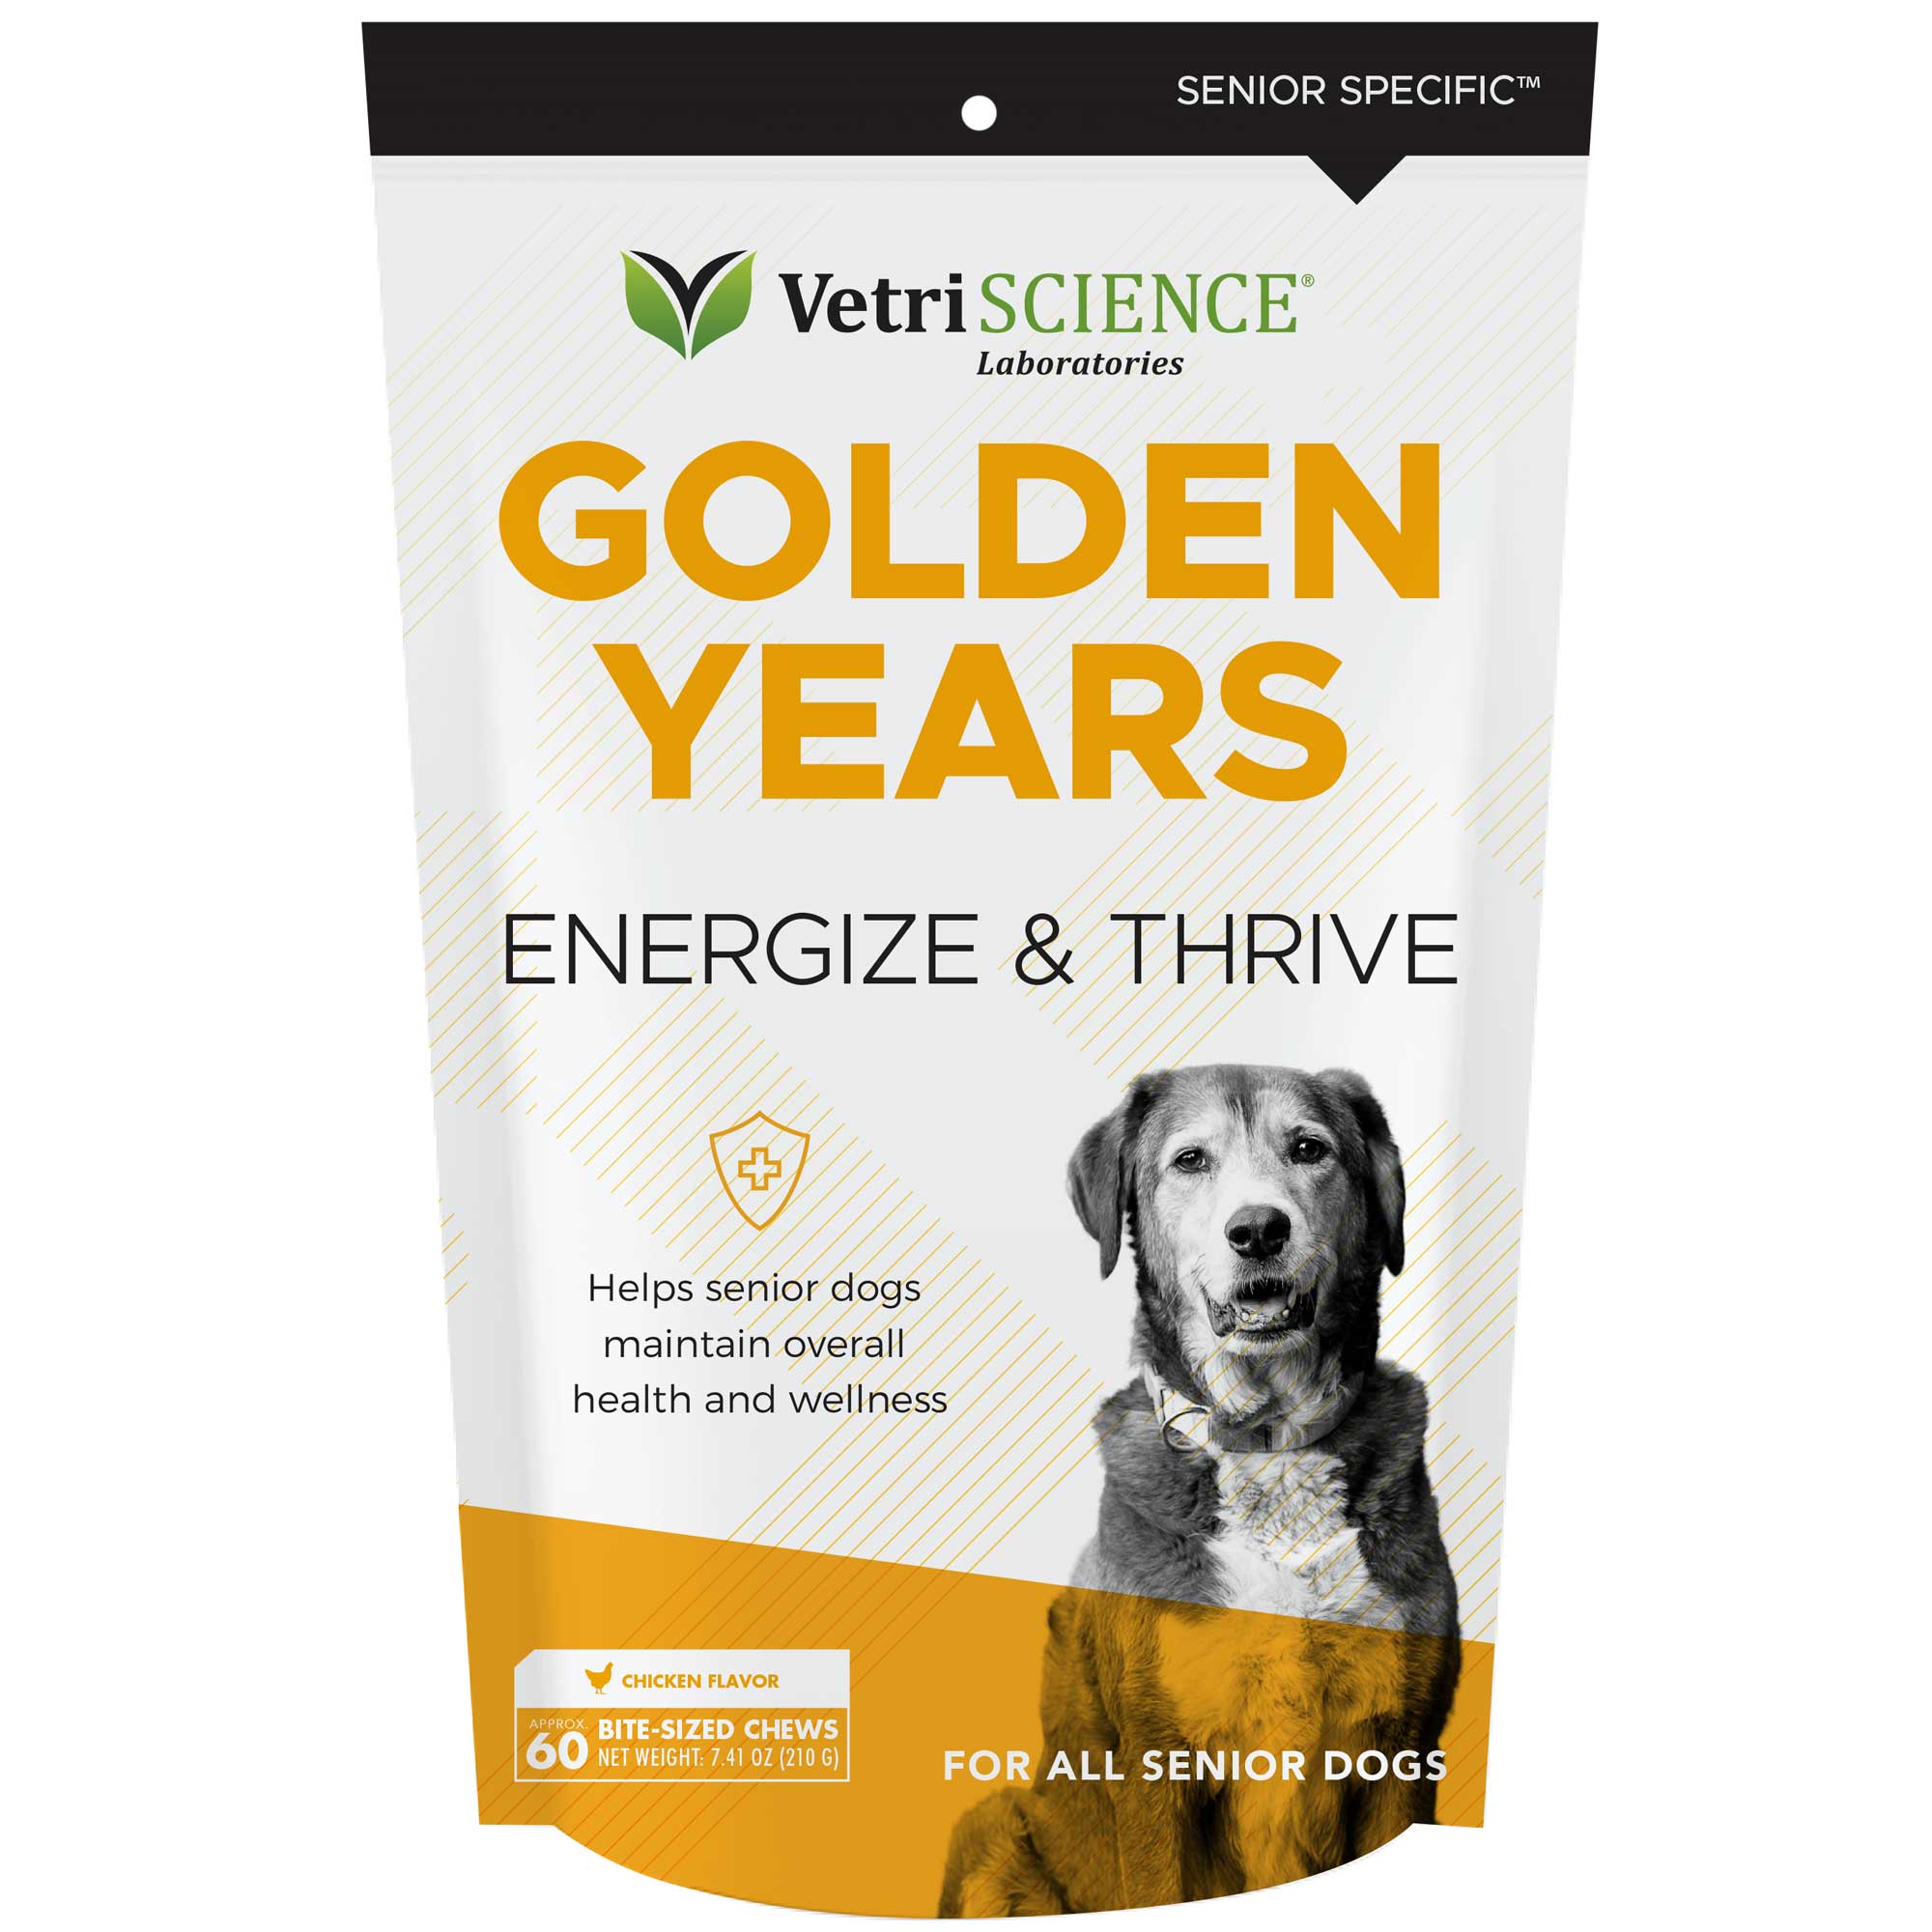 Golden Years Energize & Thrive Chews Usage